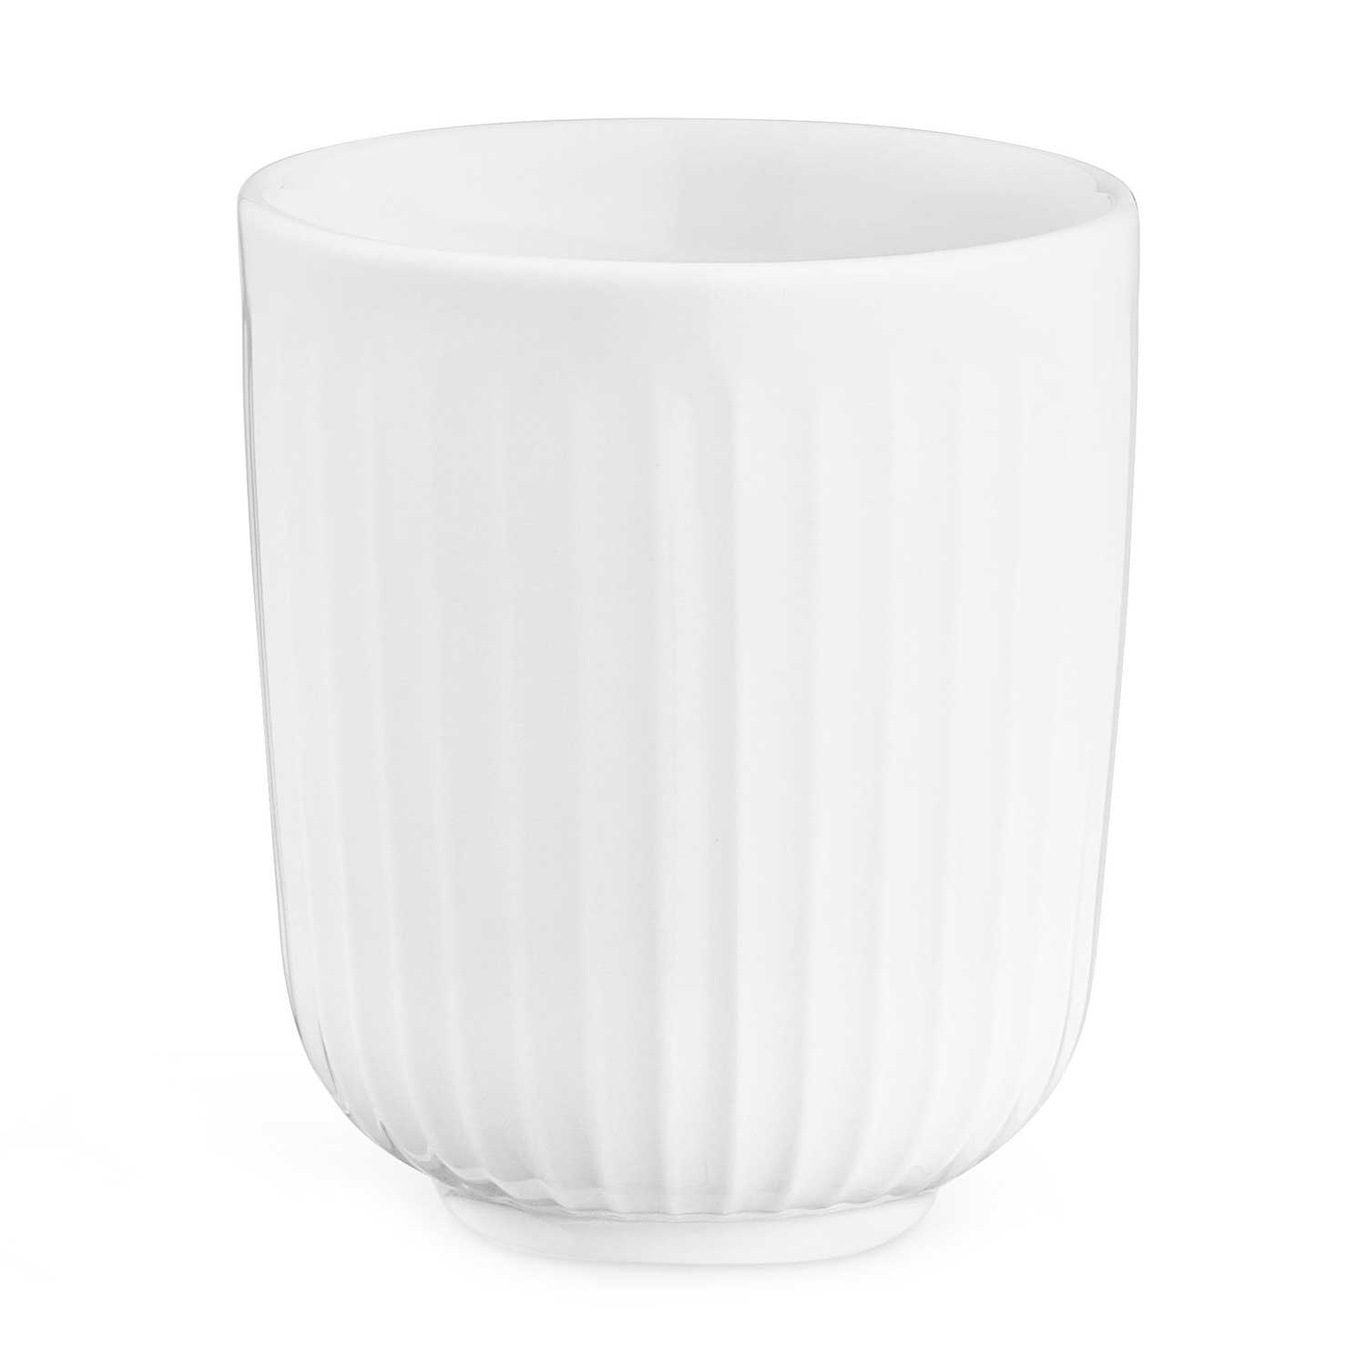 Hammershøi Thermo Cup, White